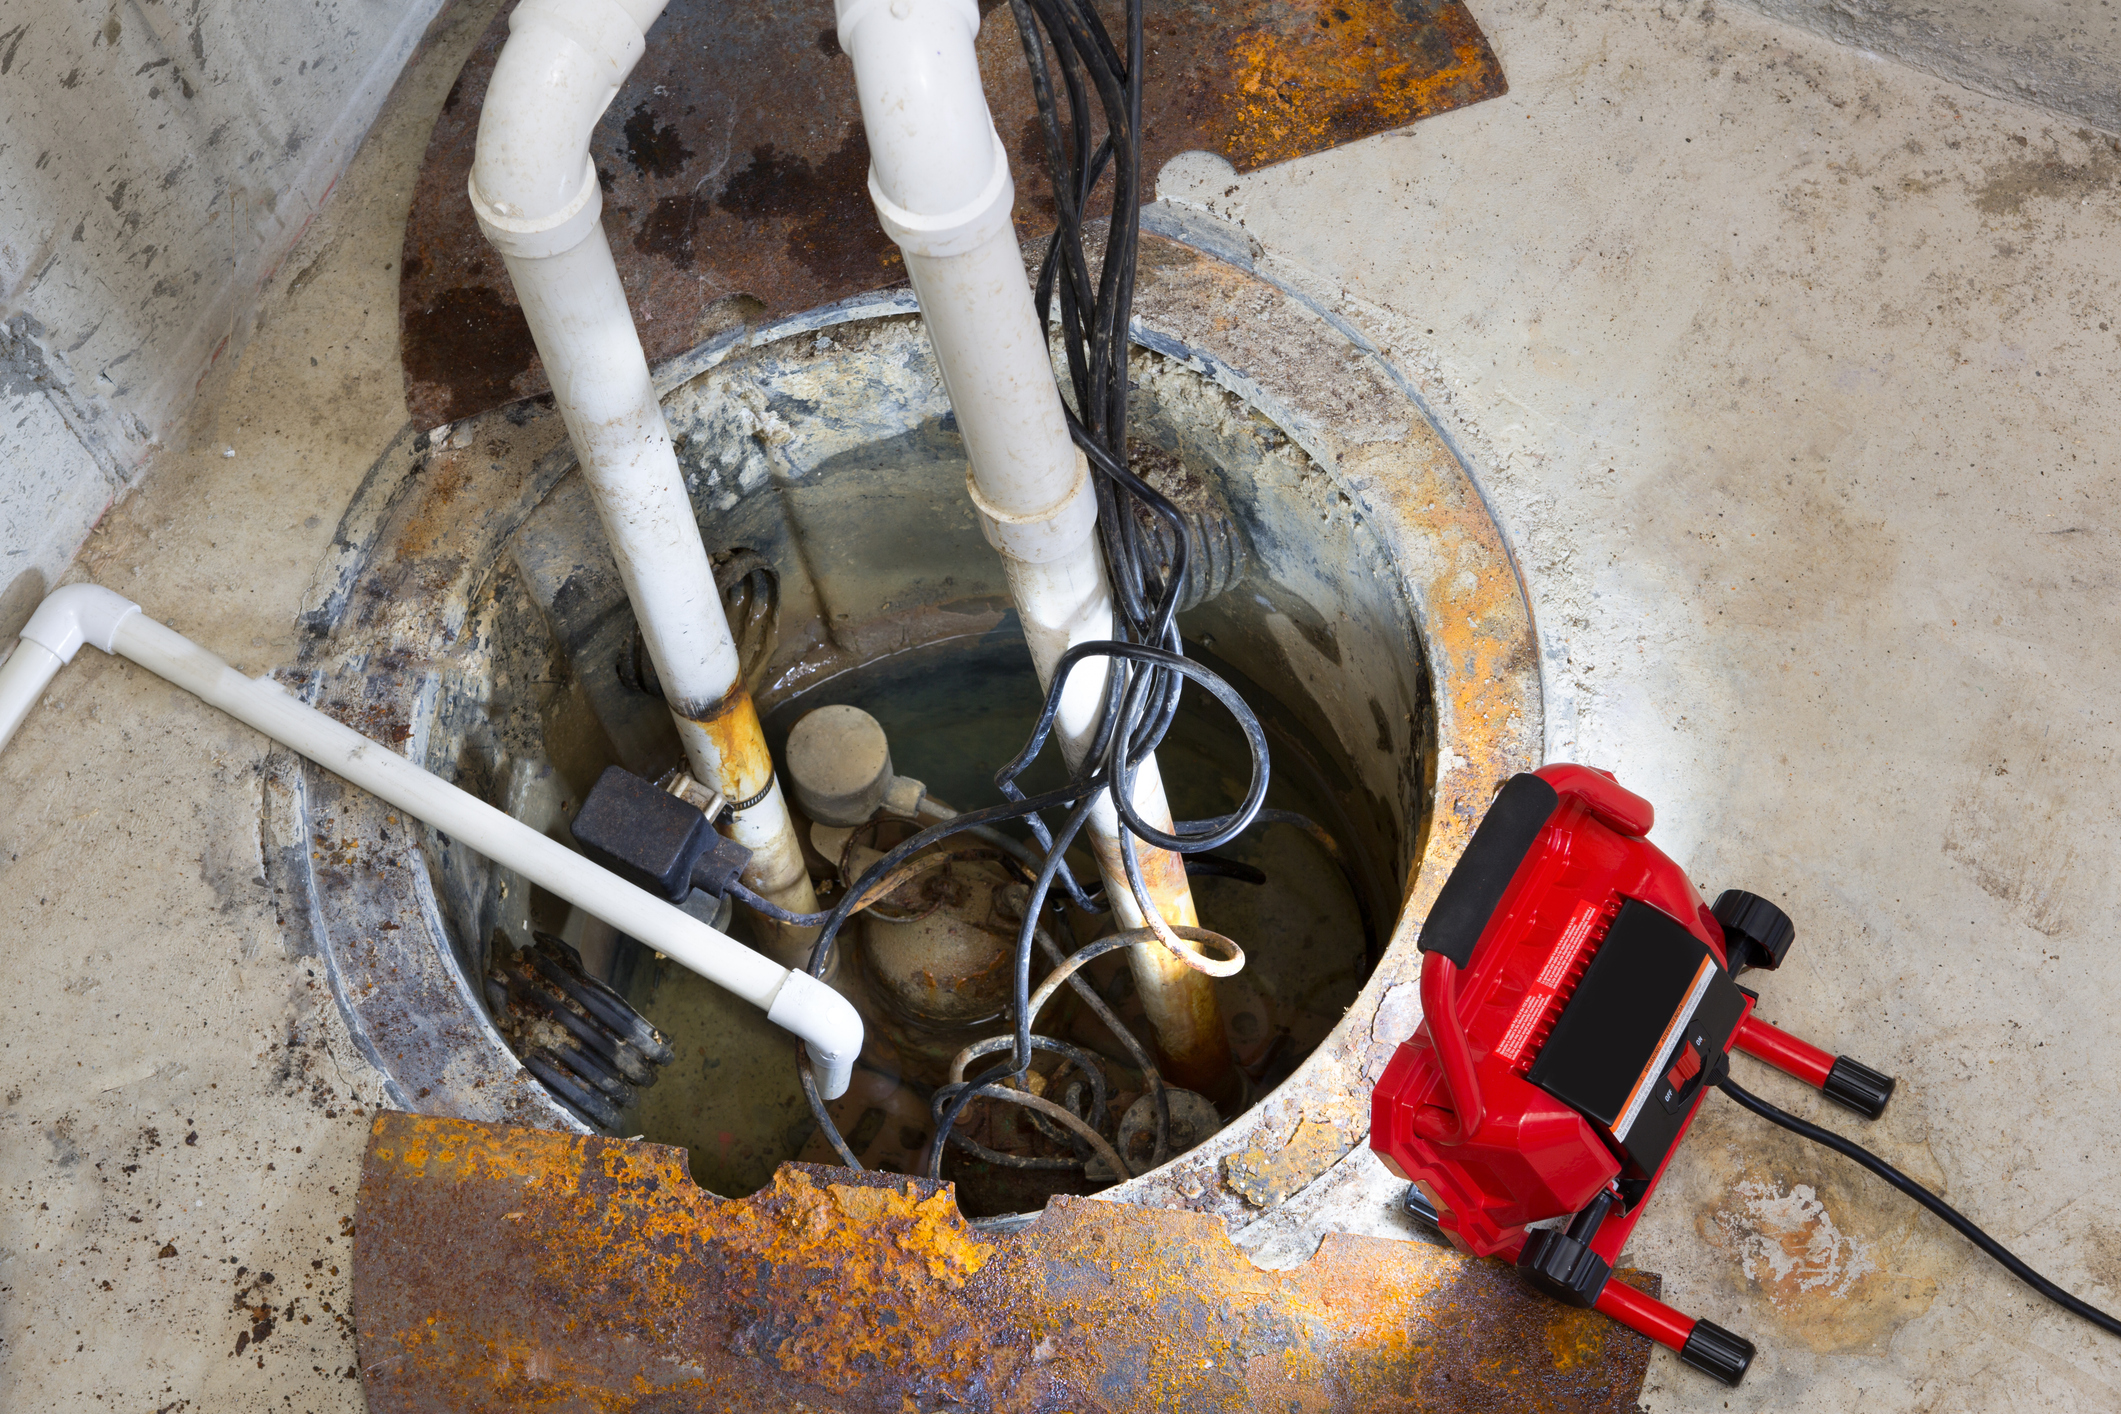 Sump pump in the basement of a West Chicago home